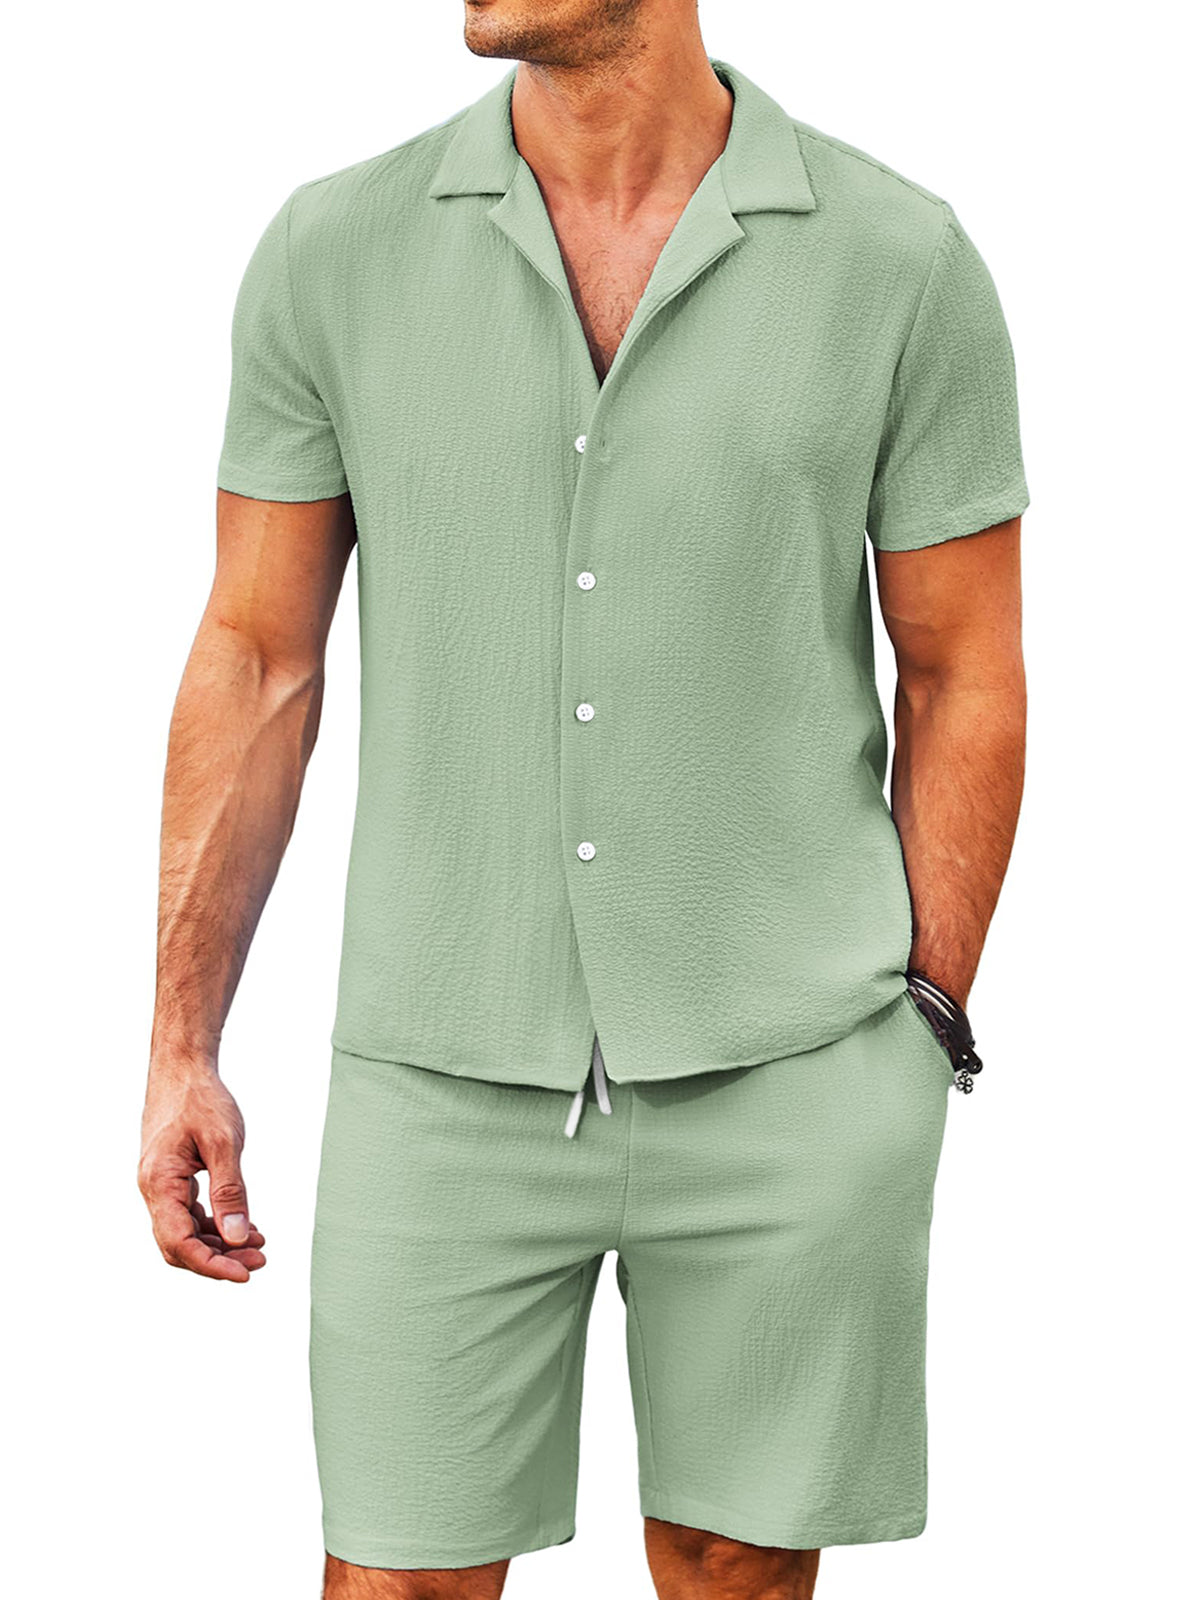 Men's Daily Comfortable Solid Color Puff Wrinkle Short Sleeve Shorts Set